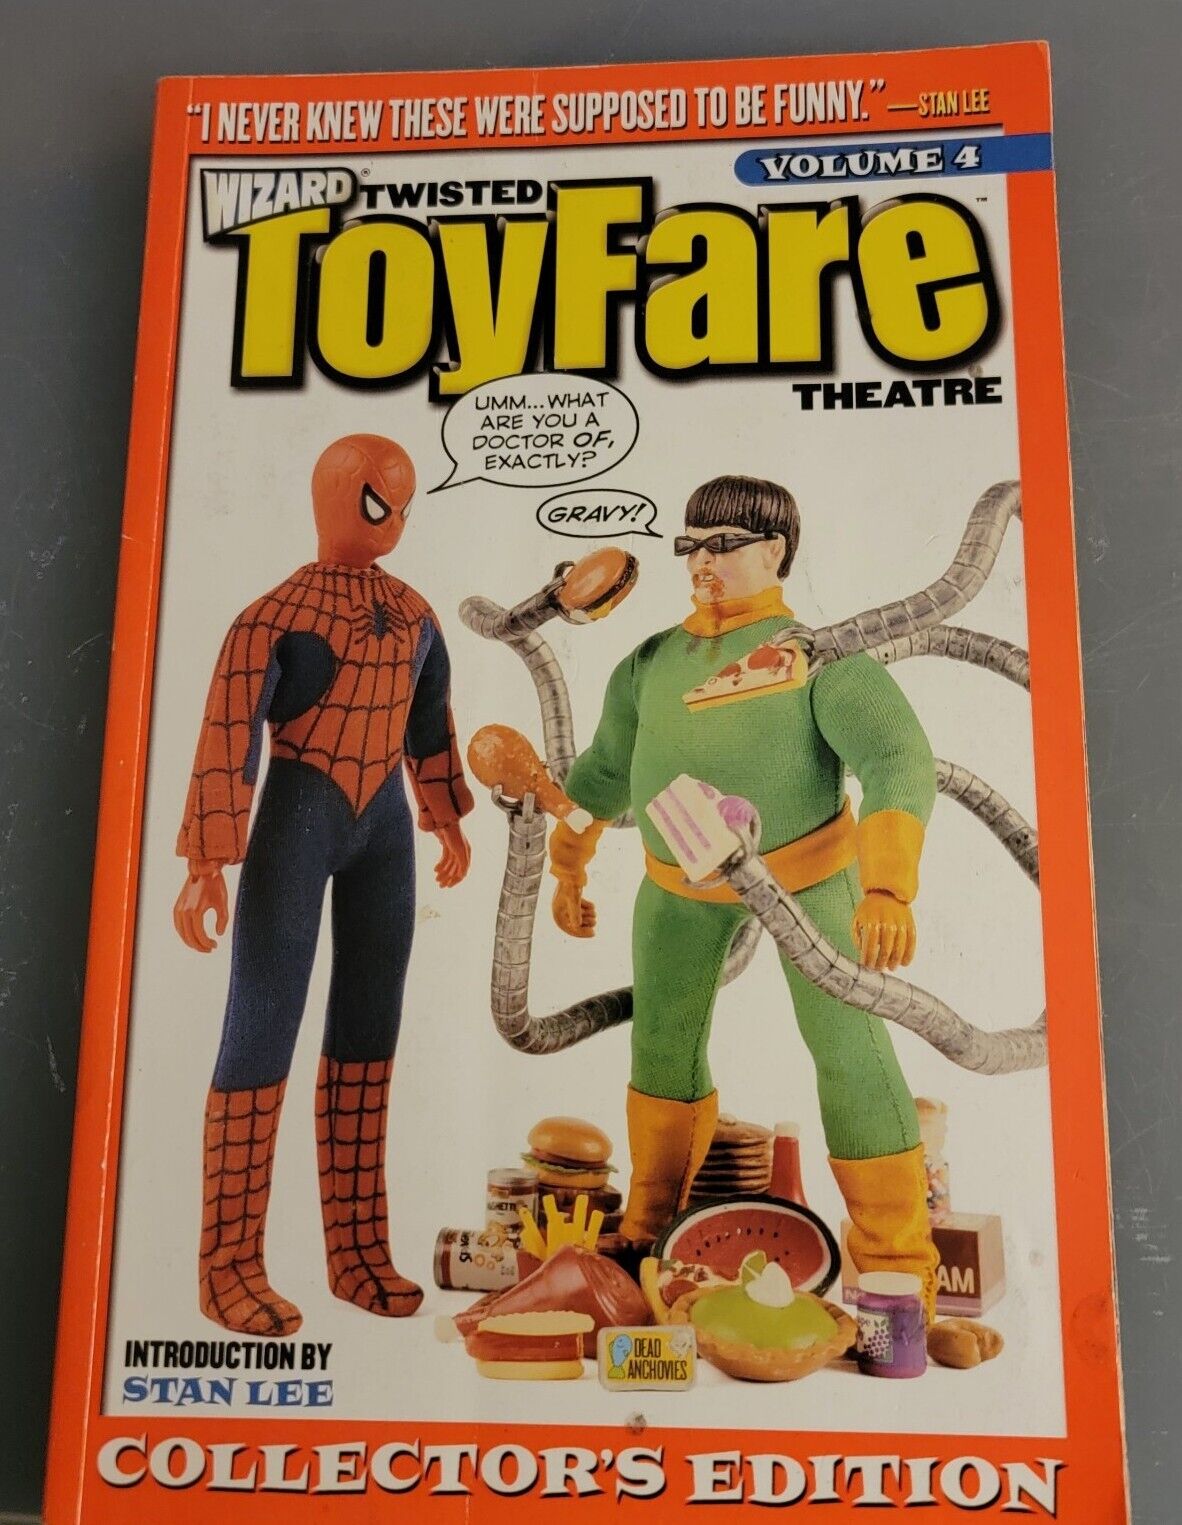 WIZARD THE BEST OF TWISTED TOYFARE THEATRE, VOL. #4, 2005, STAN LEE INTRO, NM